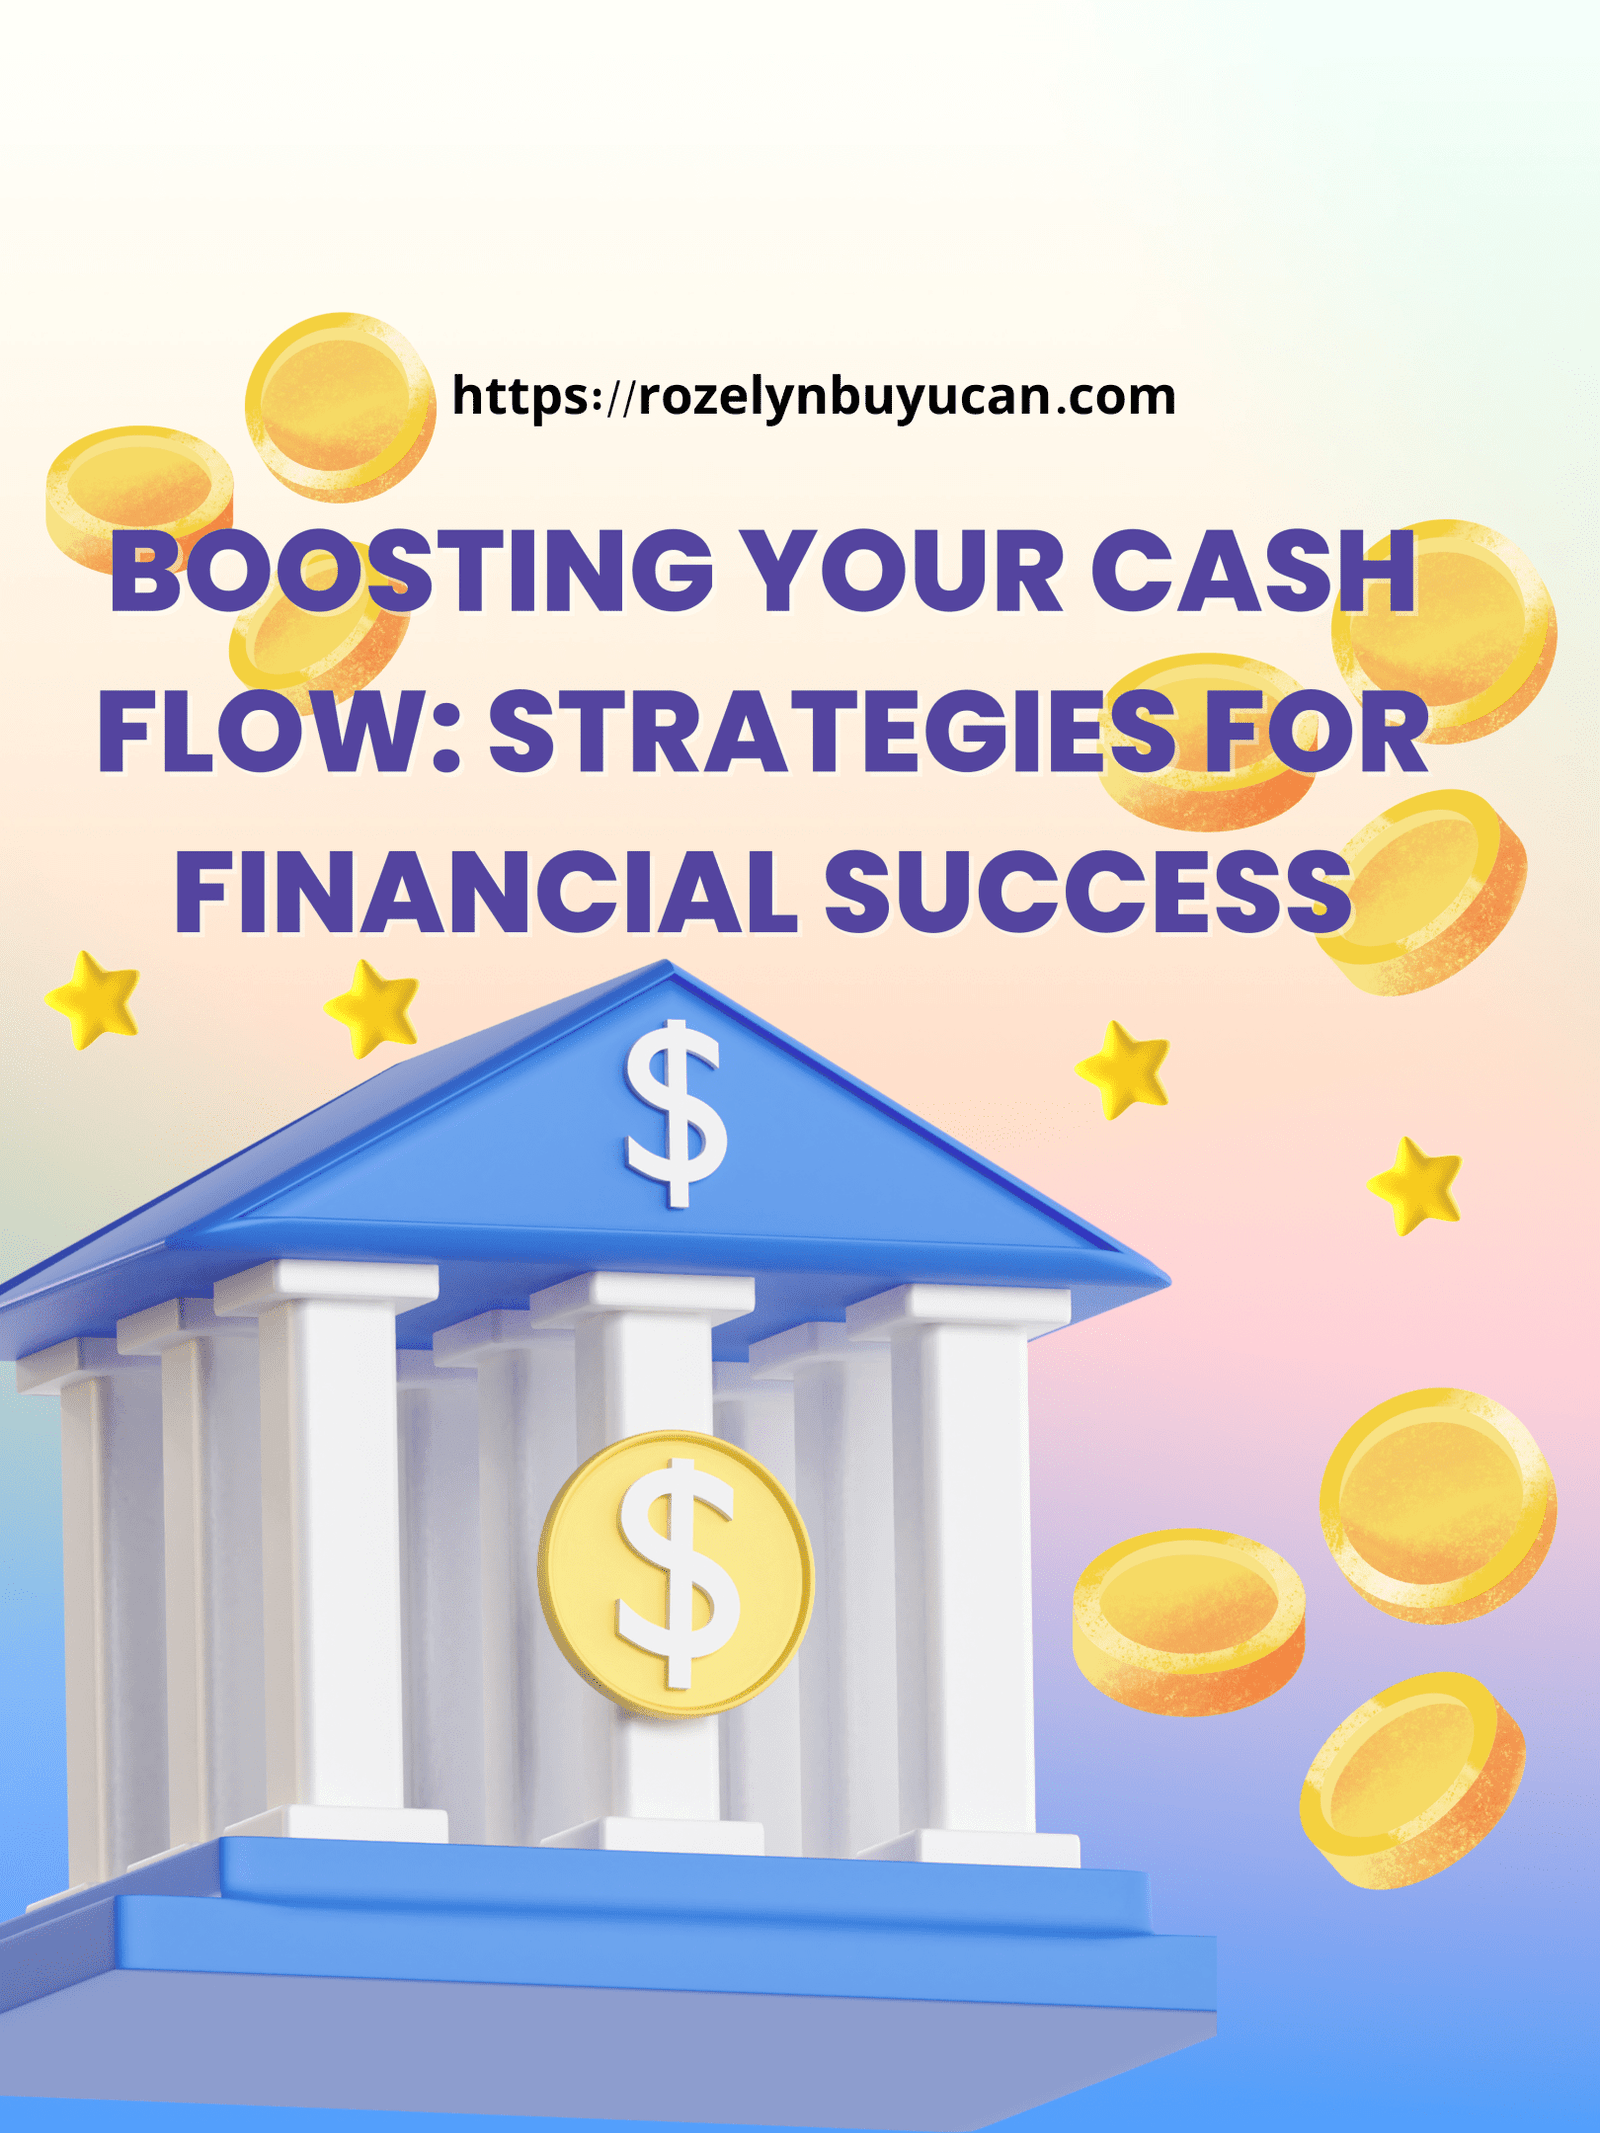 Boosting Your Cash Flow: Strategies for Financial Success